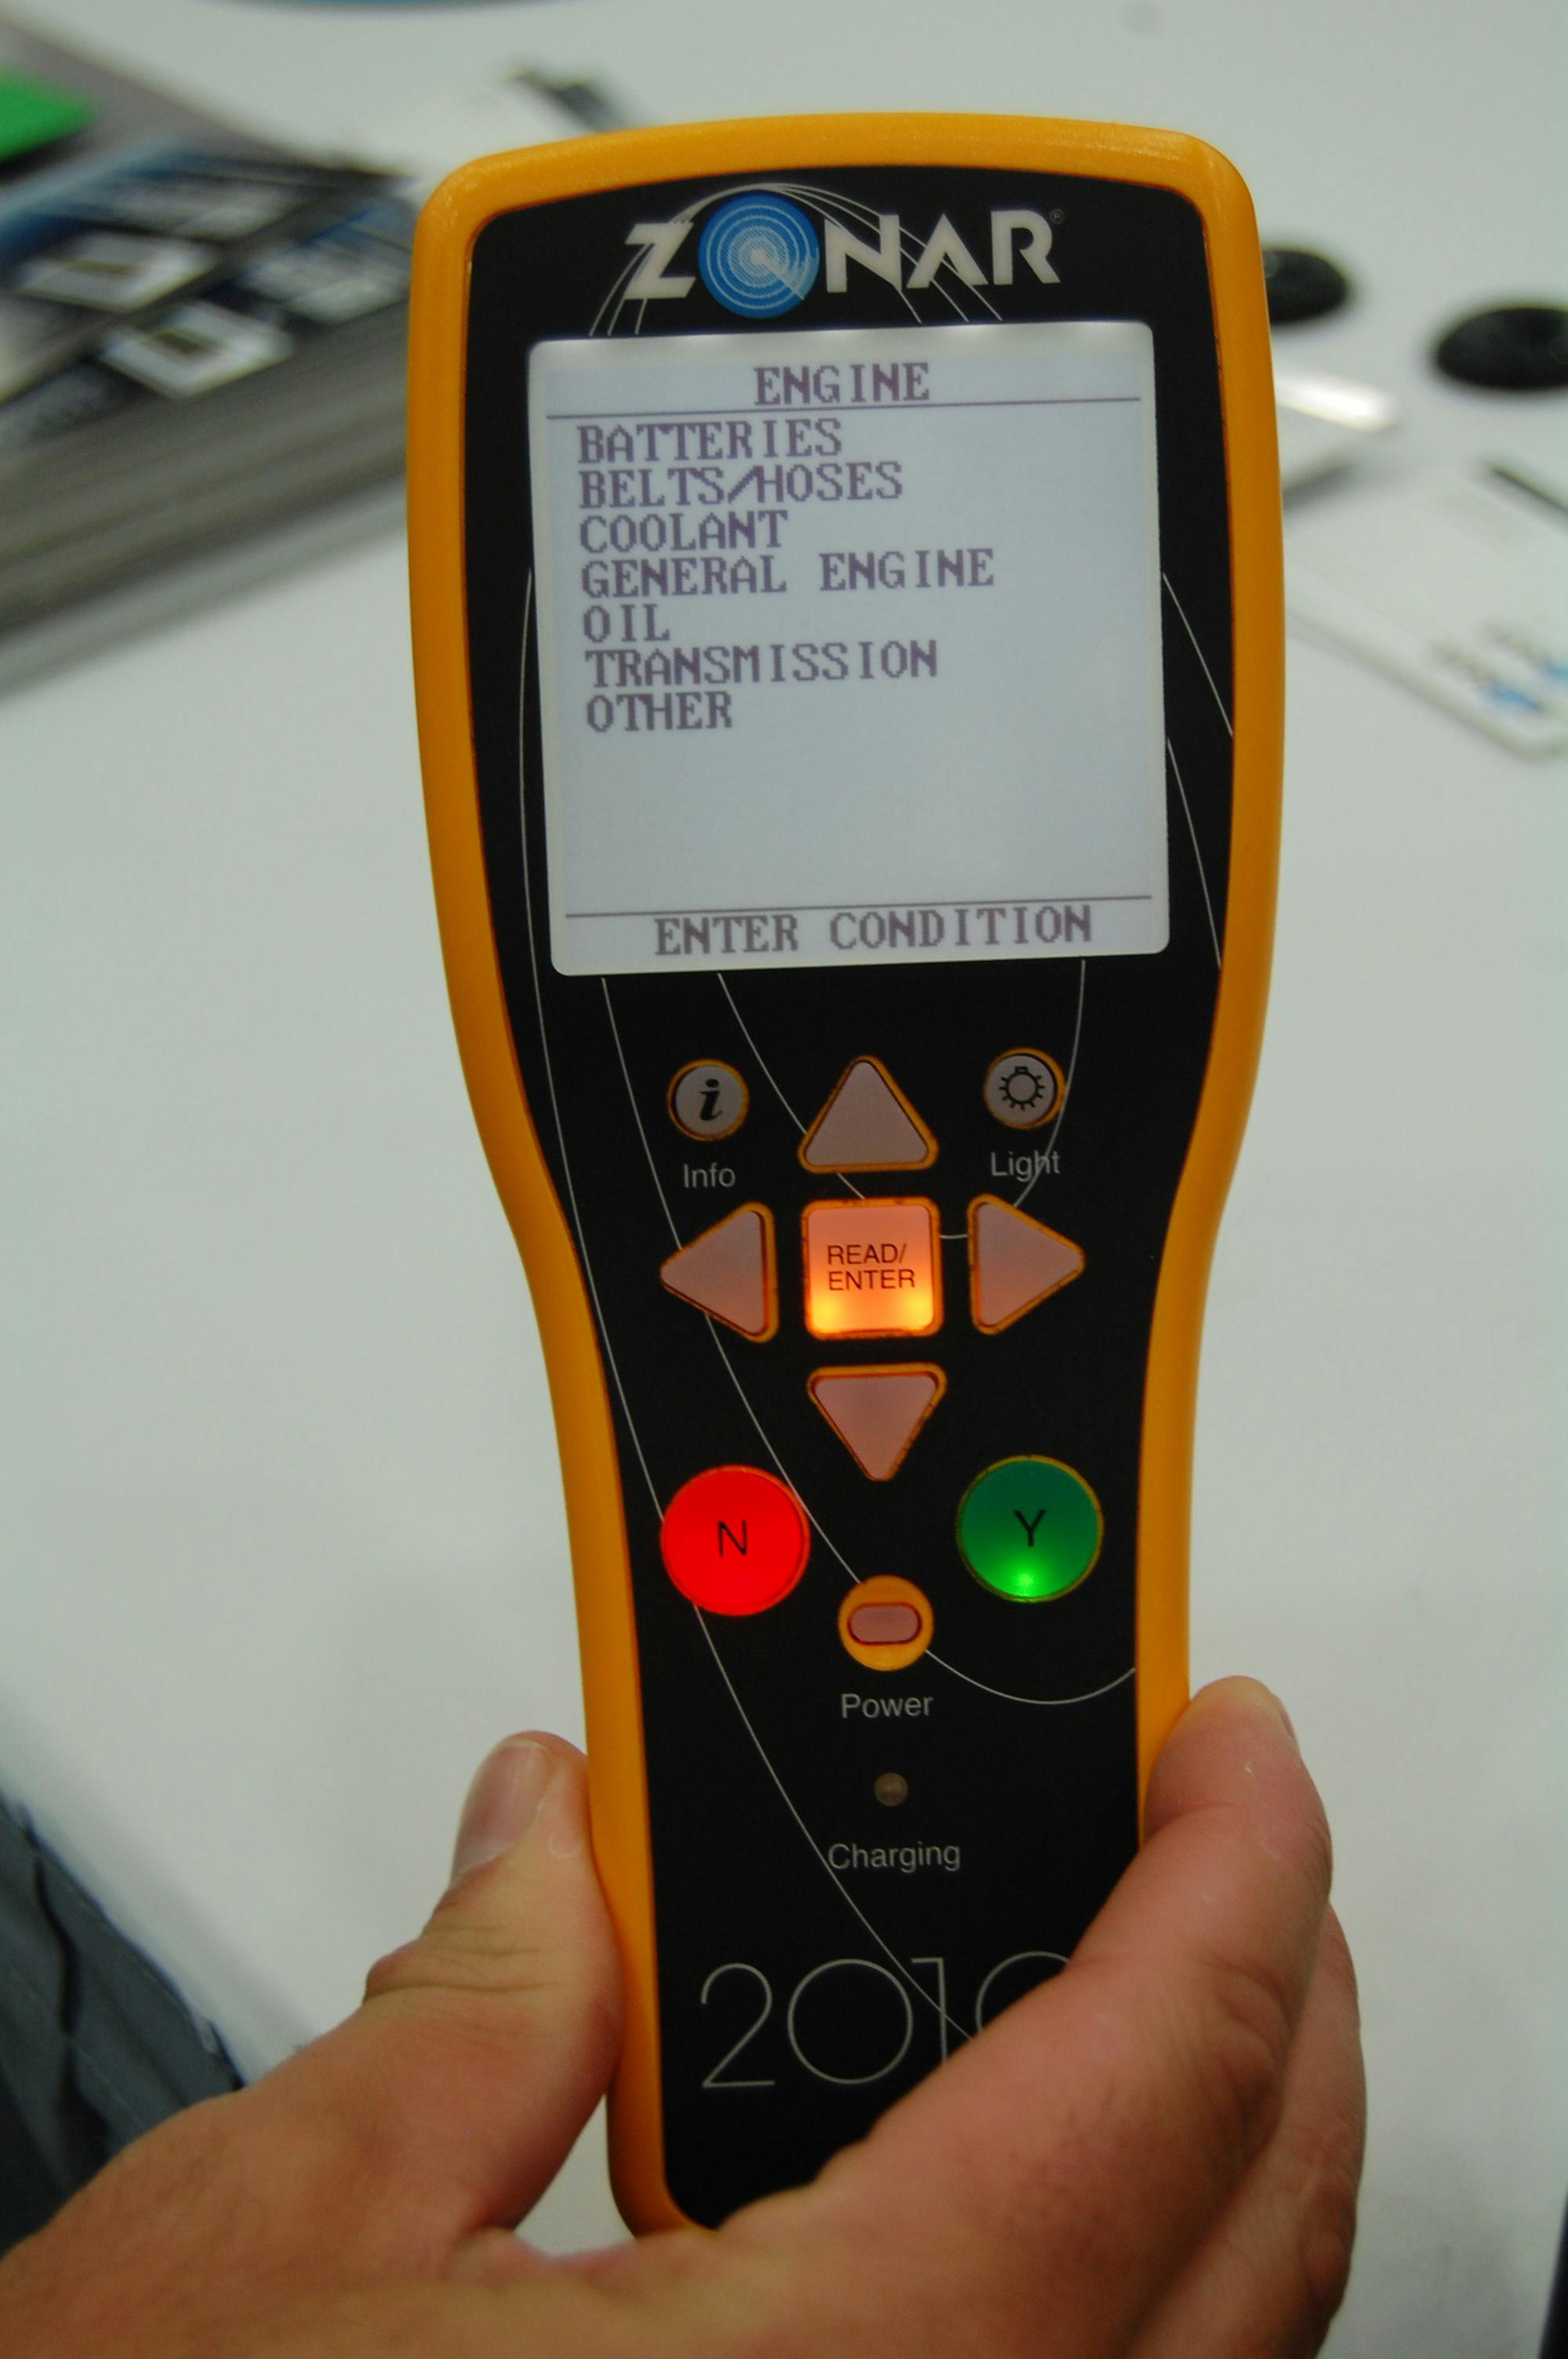 Zonar Electronic Vehicle Inspection Report Solution Simplifies Daily Inspection Checklists | Construction News